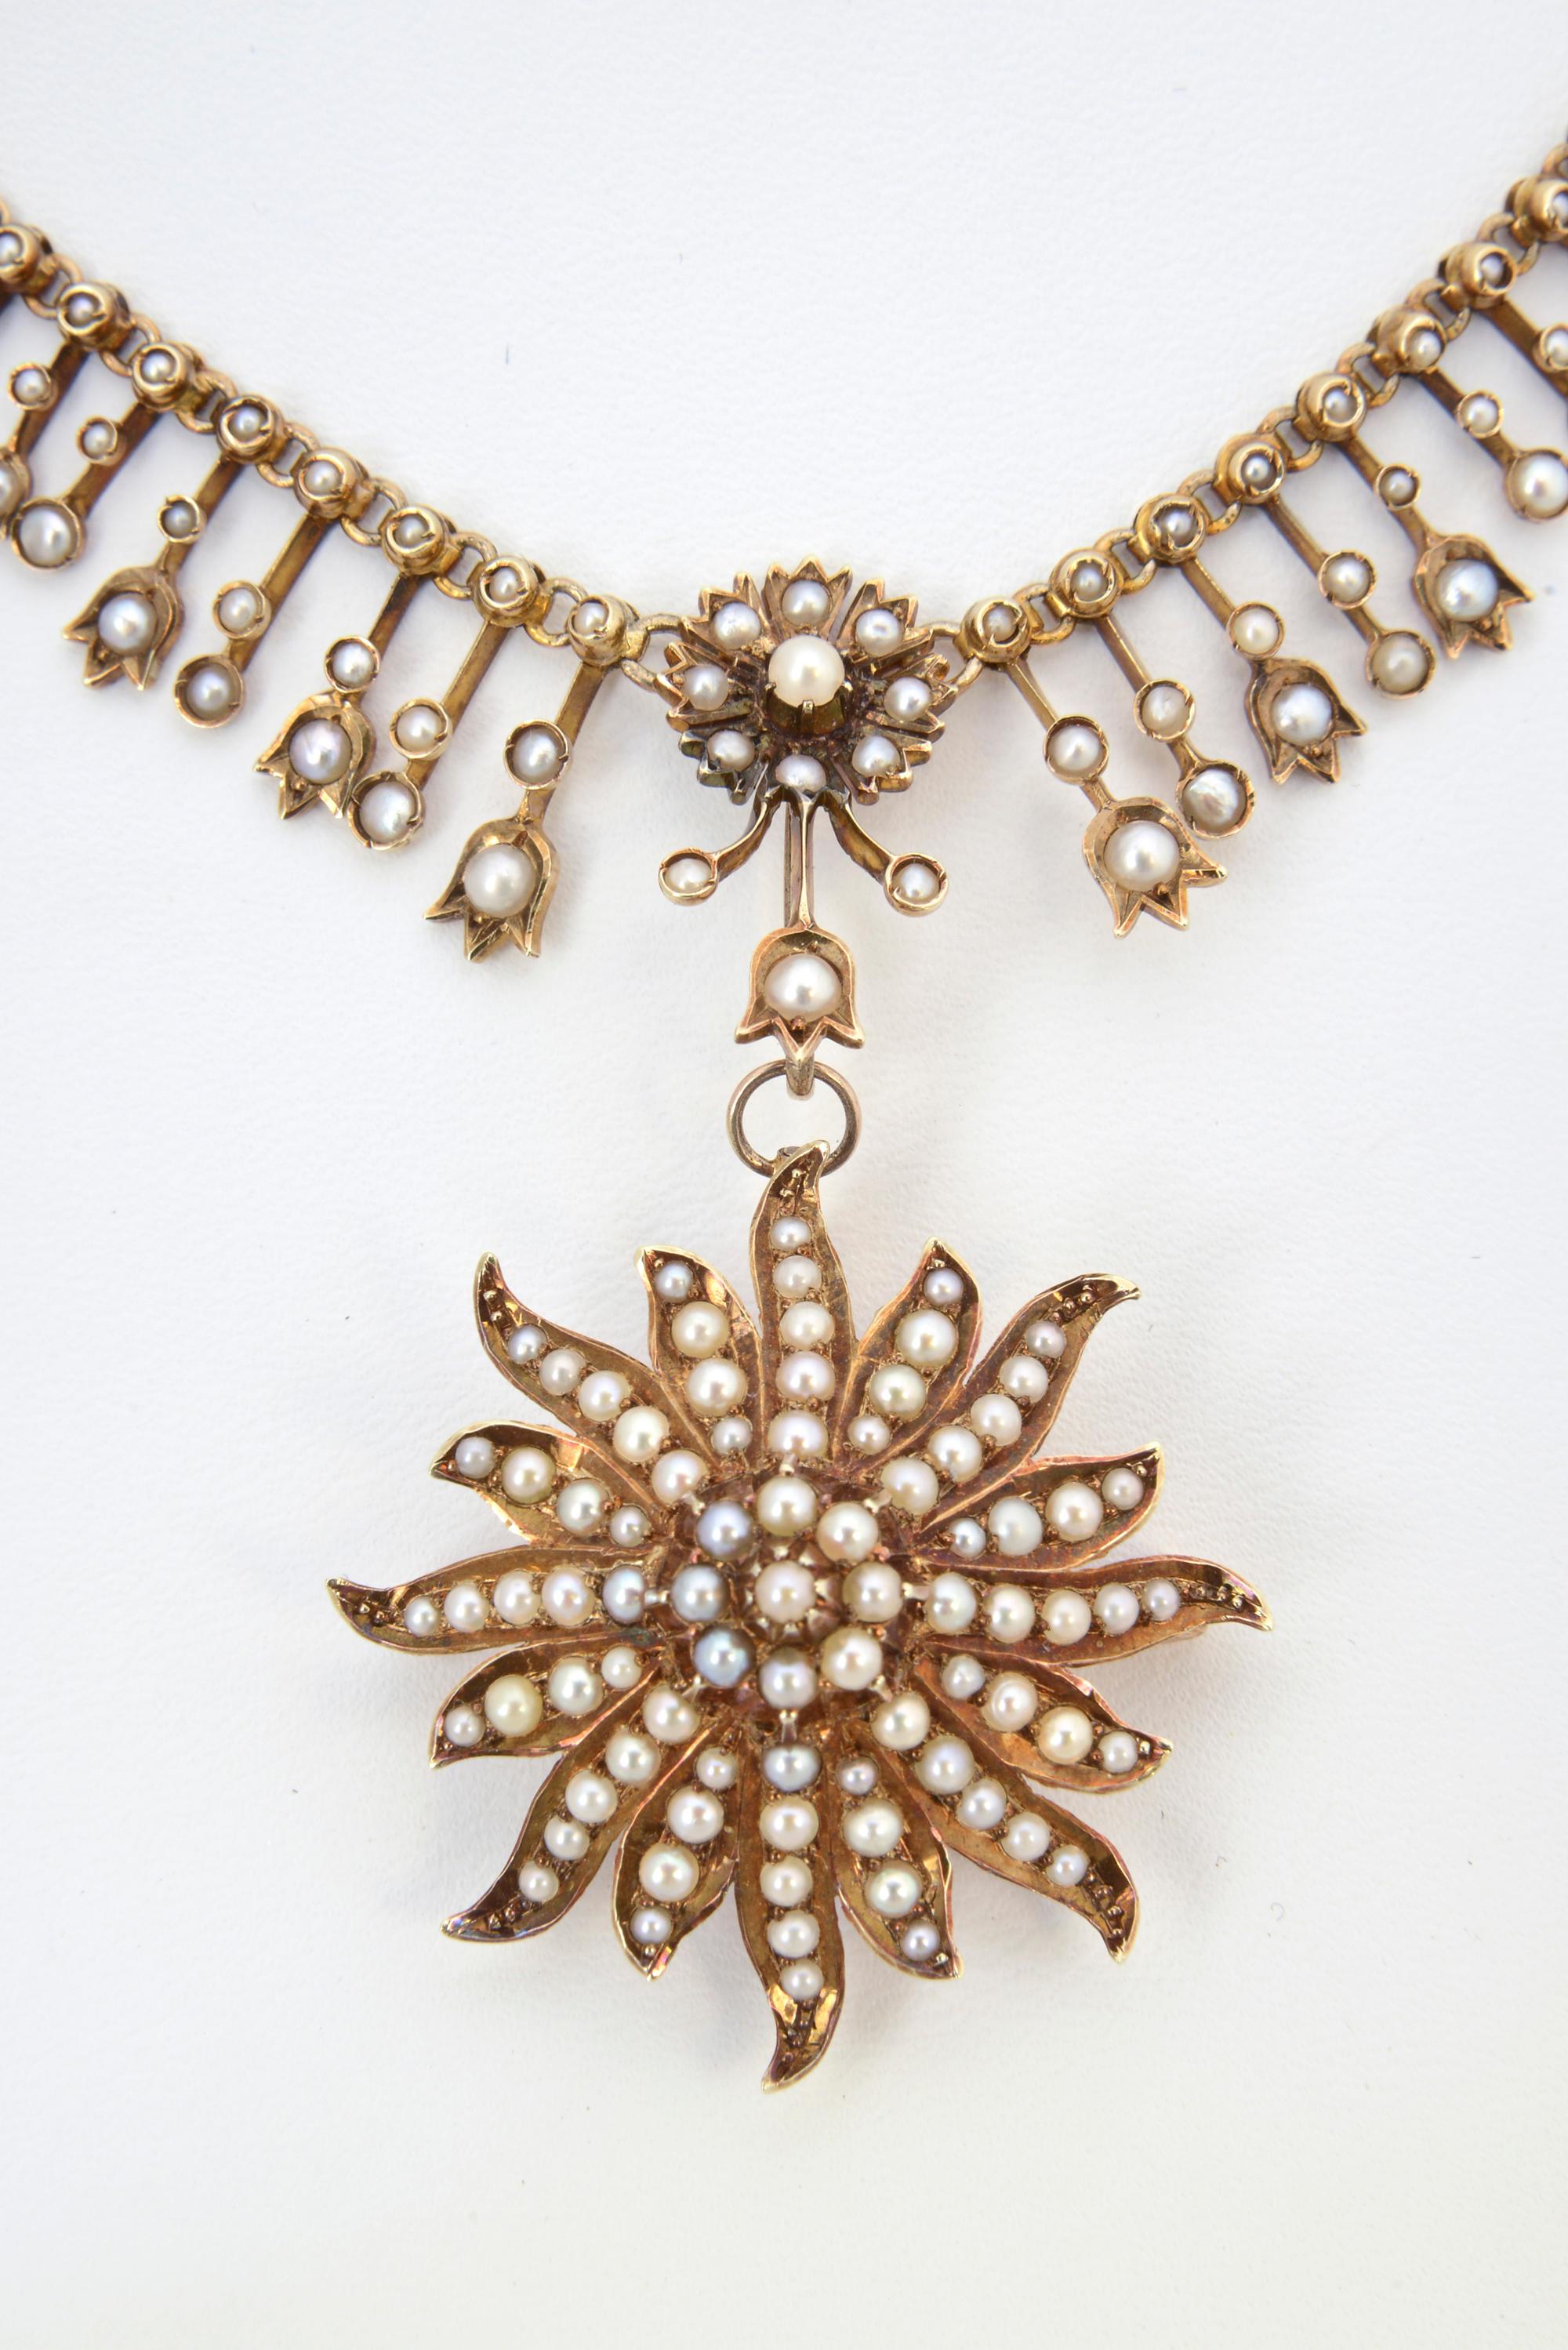 Late Victorian 14K gold and seed pearl fringe necklace. The graduated fringe has floral accents. Starburst pendant/brooch is detachable. The back of the necklace is a rope chain. Pendant/brooch, 1.5